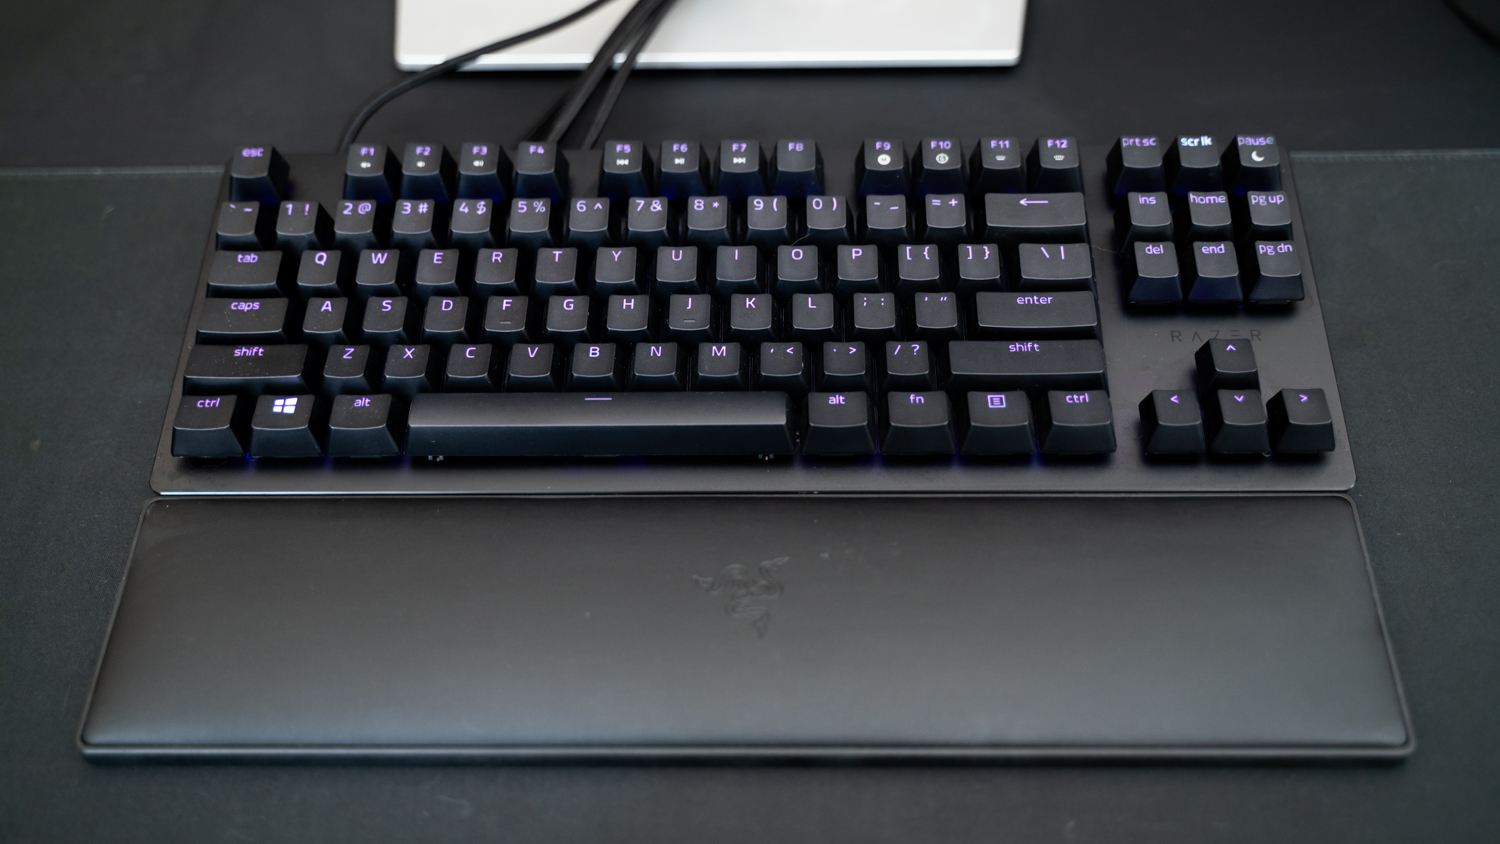 Razer Huntsman V2 review: Refined, streamlined and still top of the tree